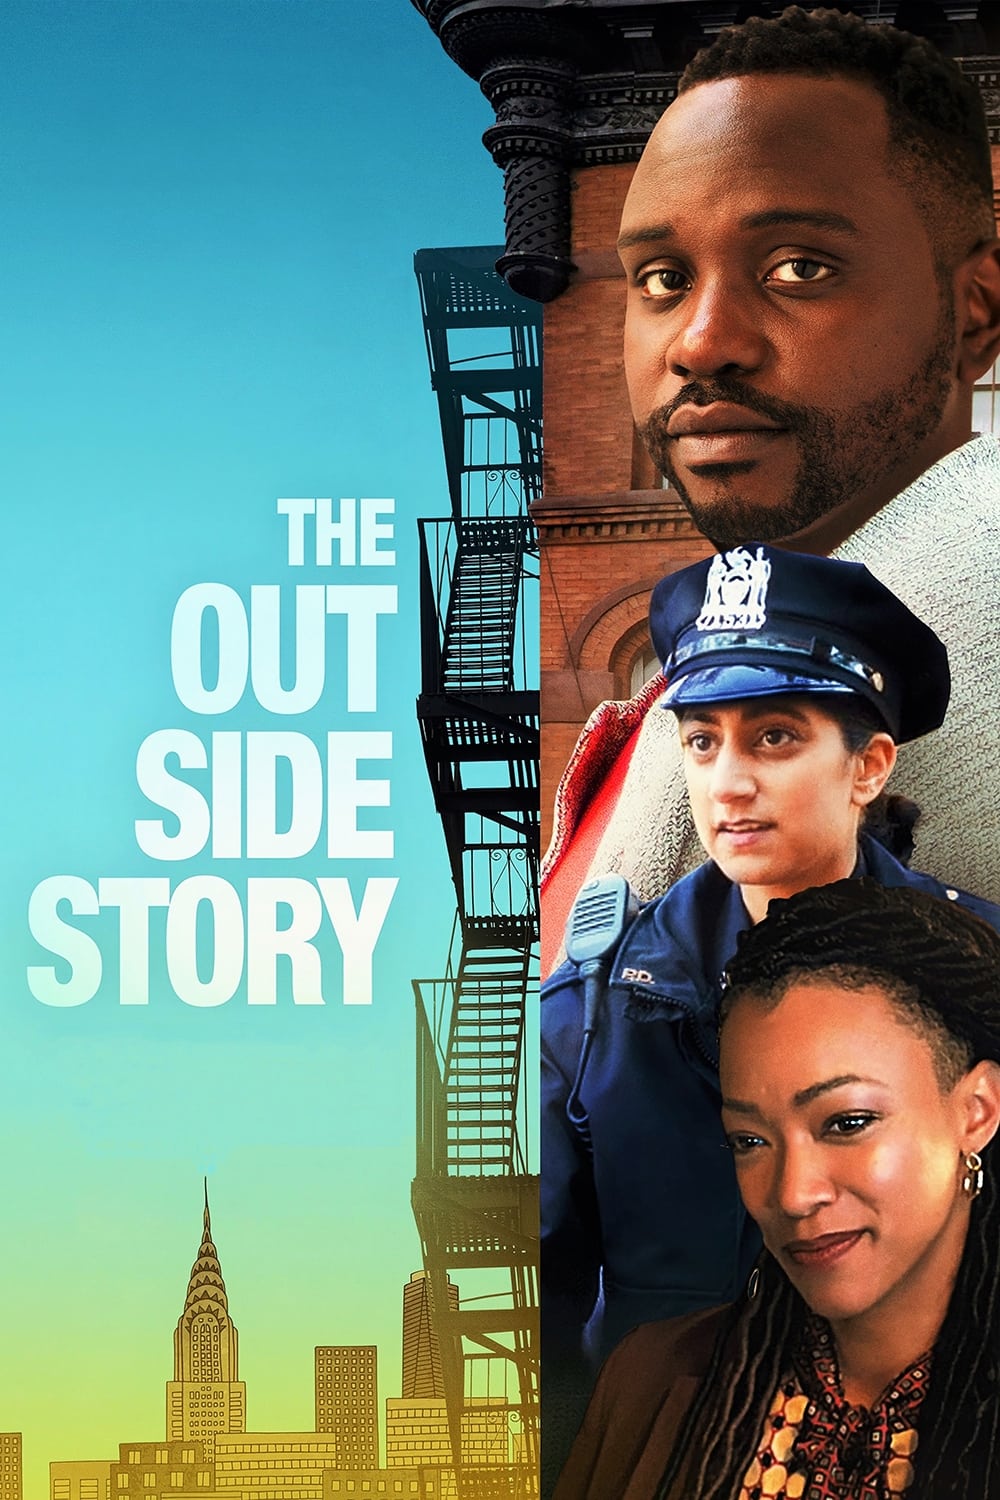 The Outside Story film